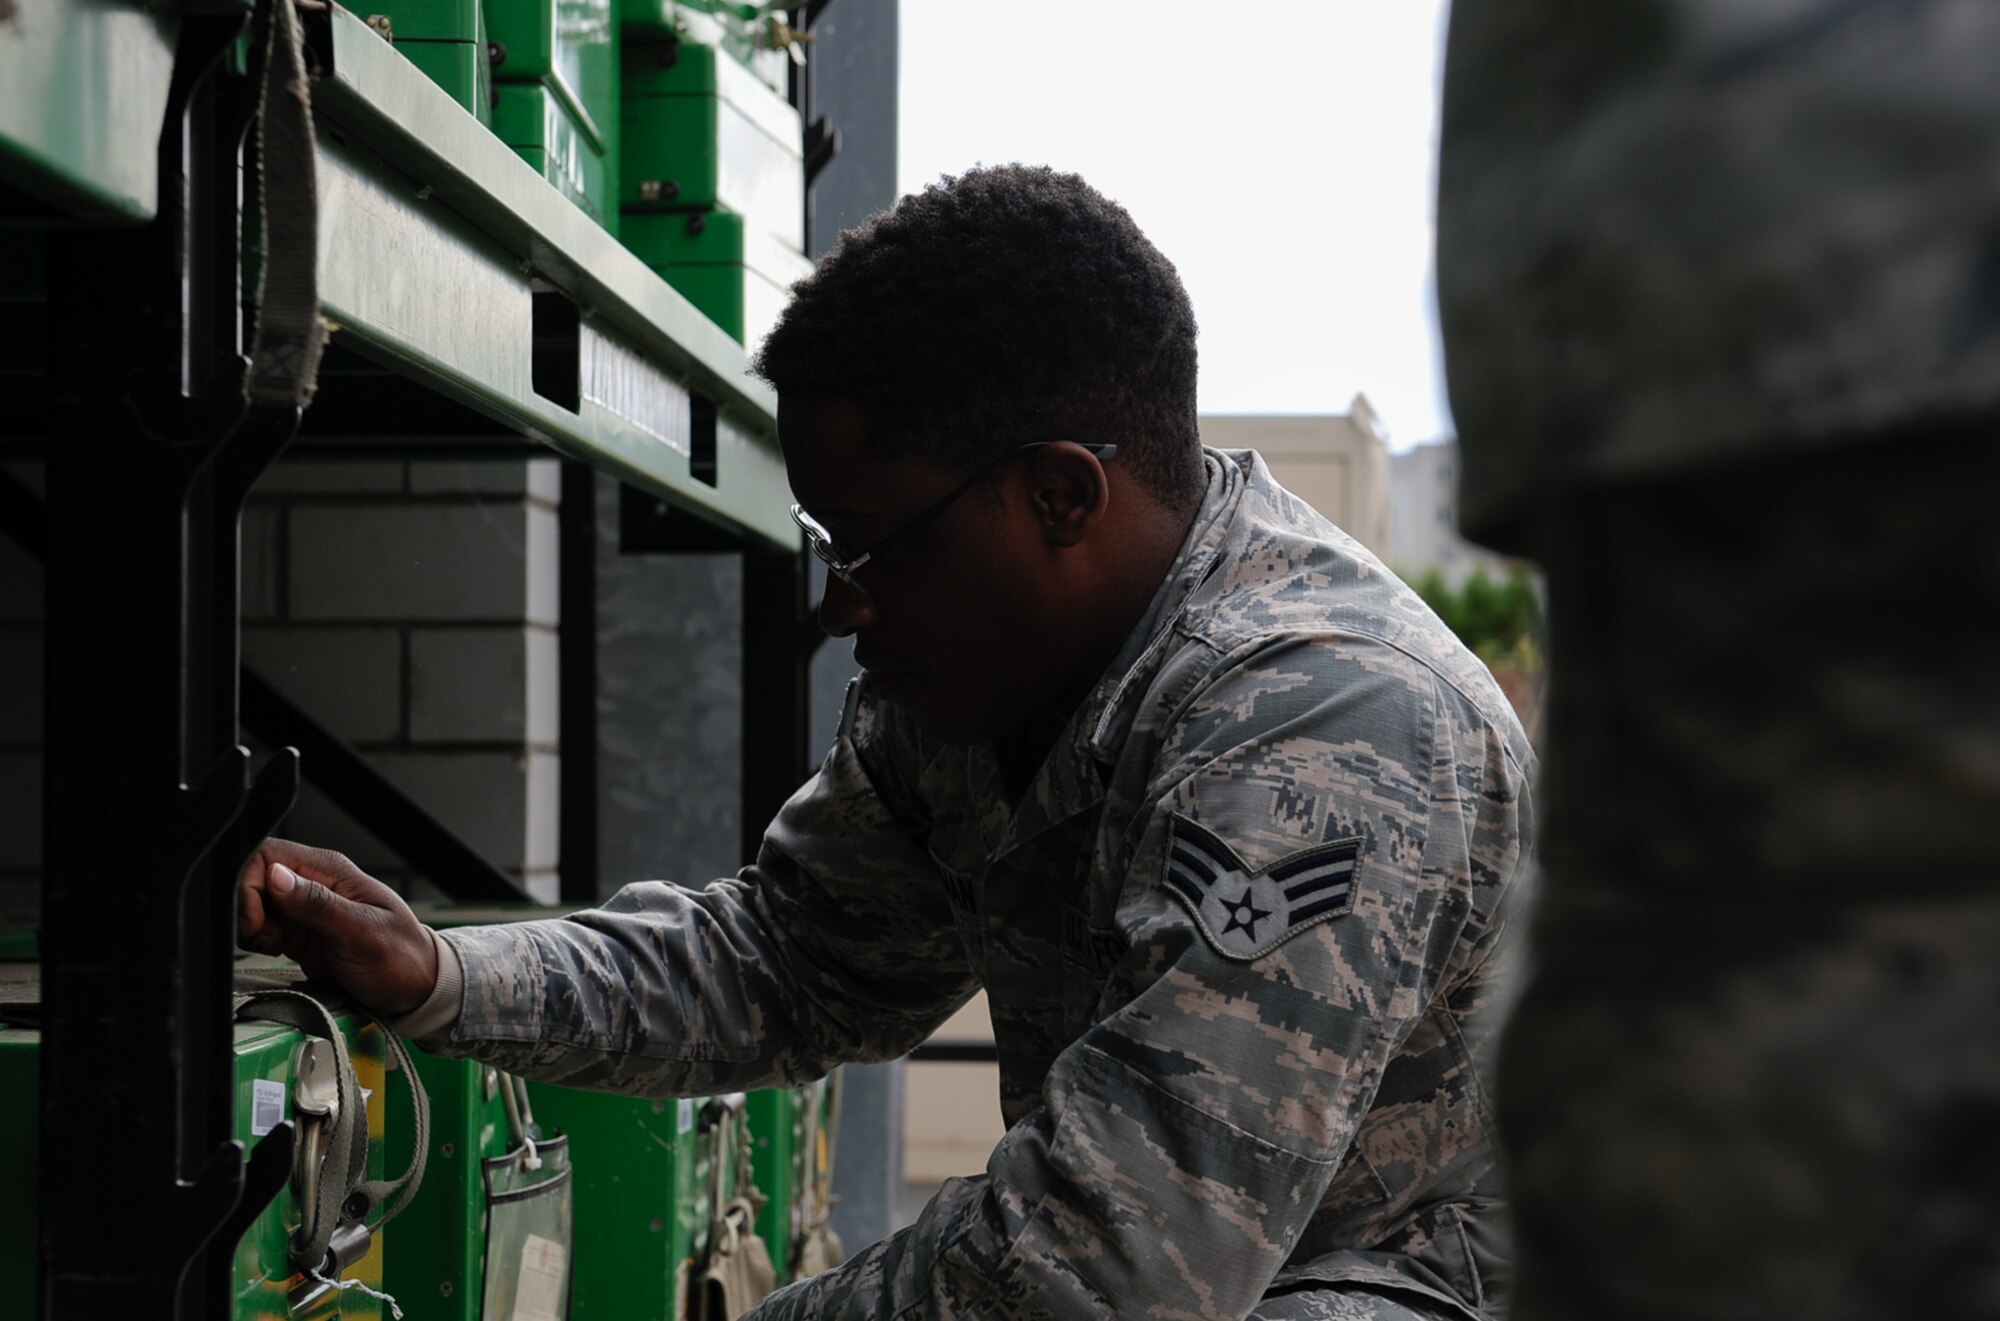 An 86th Medical Support Squadron Airman takes inventory after Exercise Immediate Response 2016 in Slovenia at Ramstein Air Base, Germany, Sept. 28, 2016. Supplies used in exercises like Immediate Response 2016 are inventoried before and after the exercise. (U.S. Air Force photo by Airman 1st Class Savannah L. Waters) 


 



